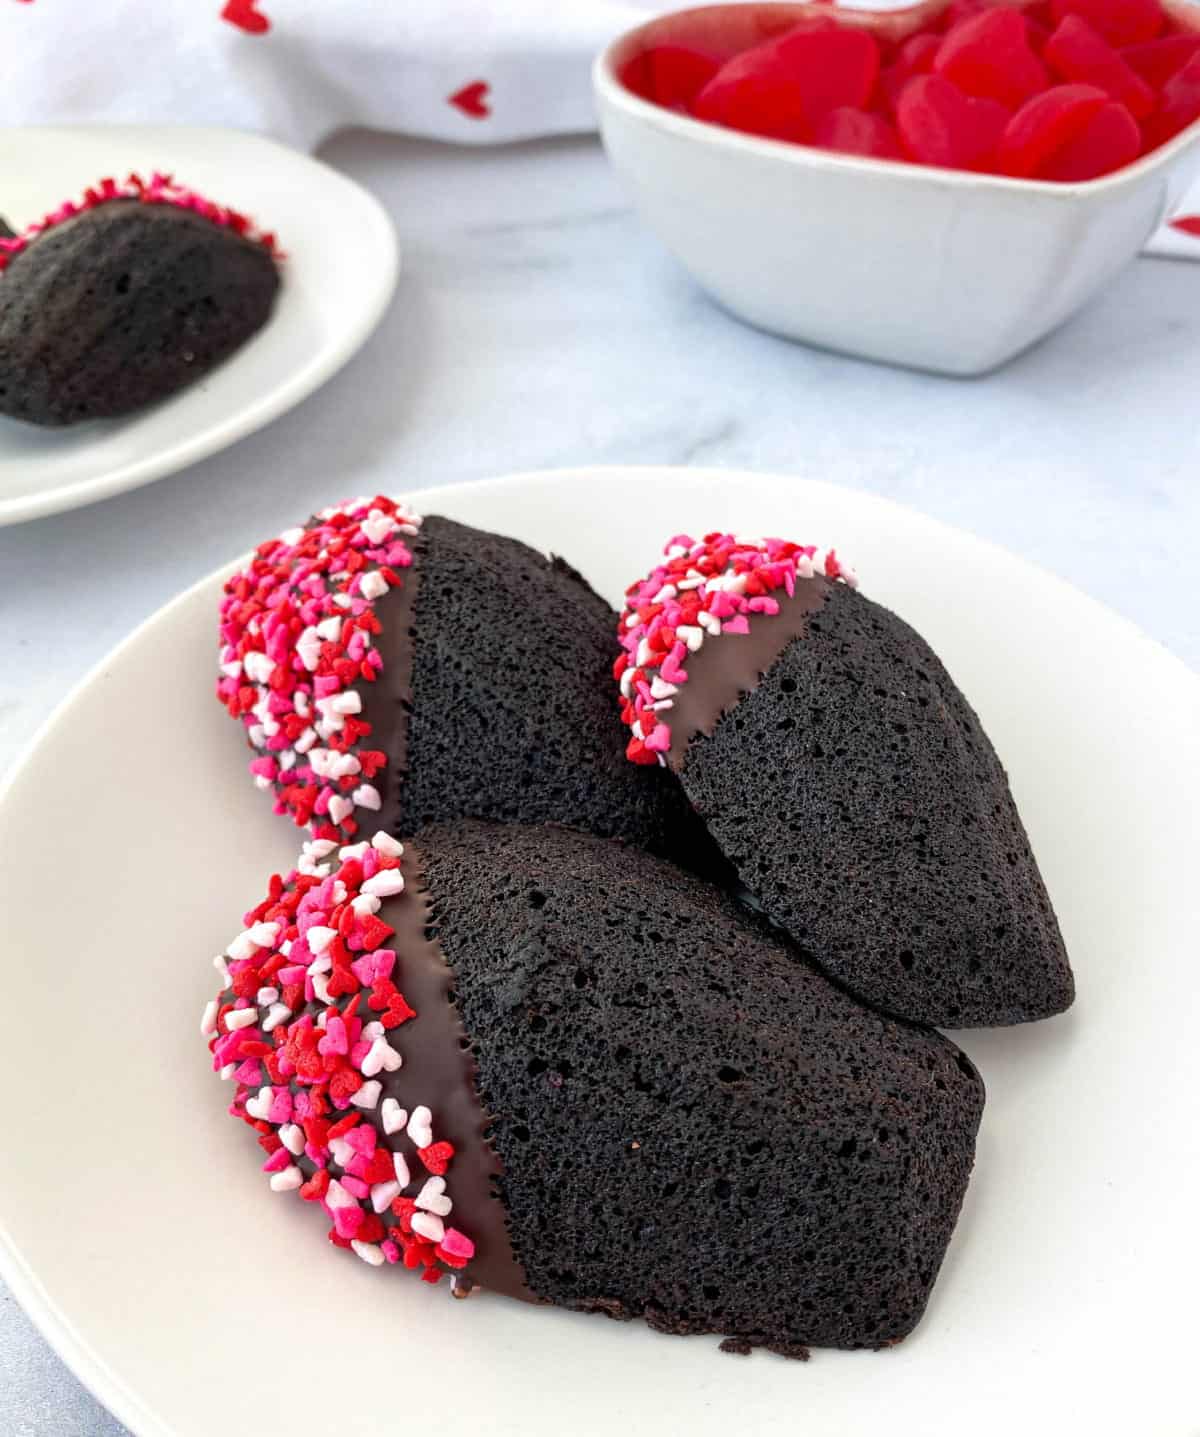 Chocolate Madeleines with valentine's day sprinkles on a white plate.